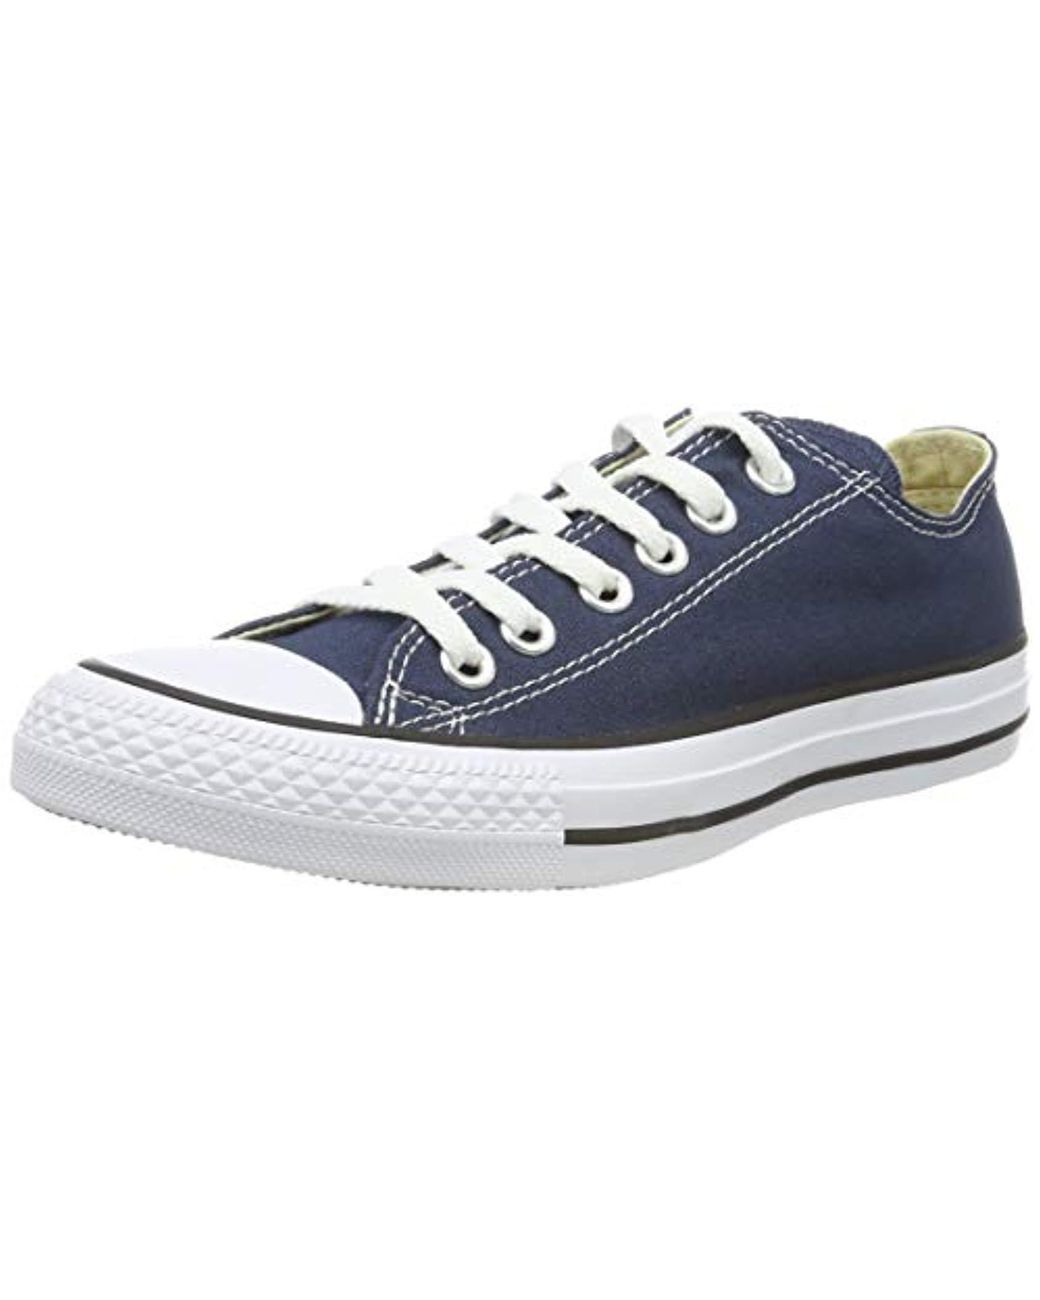 Lyst - Converse Chuck Taylor All Star Leather Hi in Blue for Men